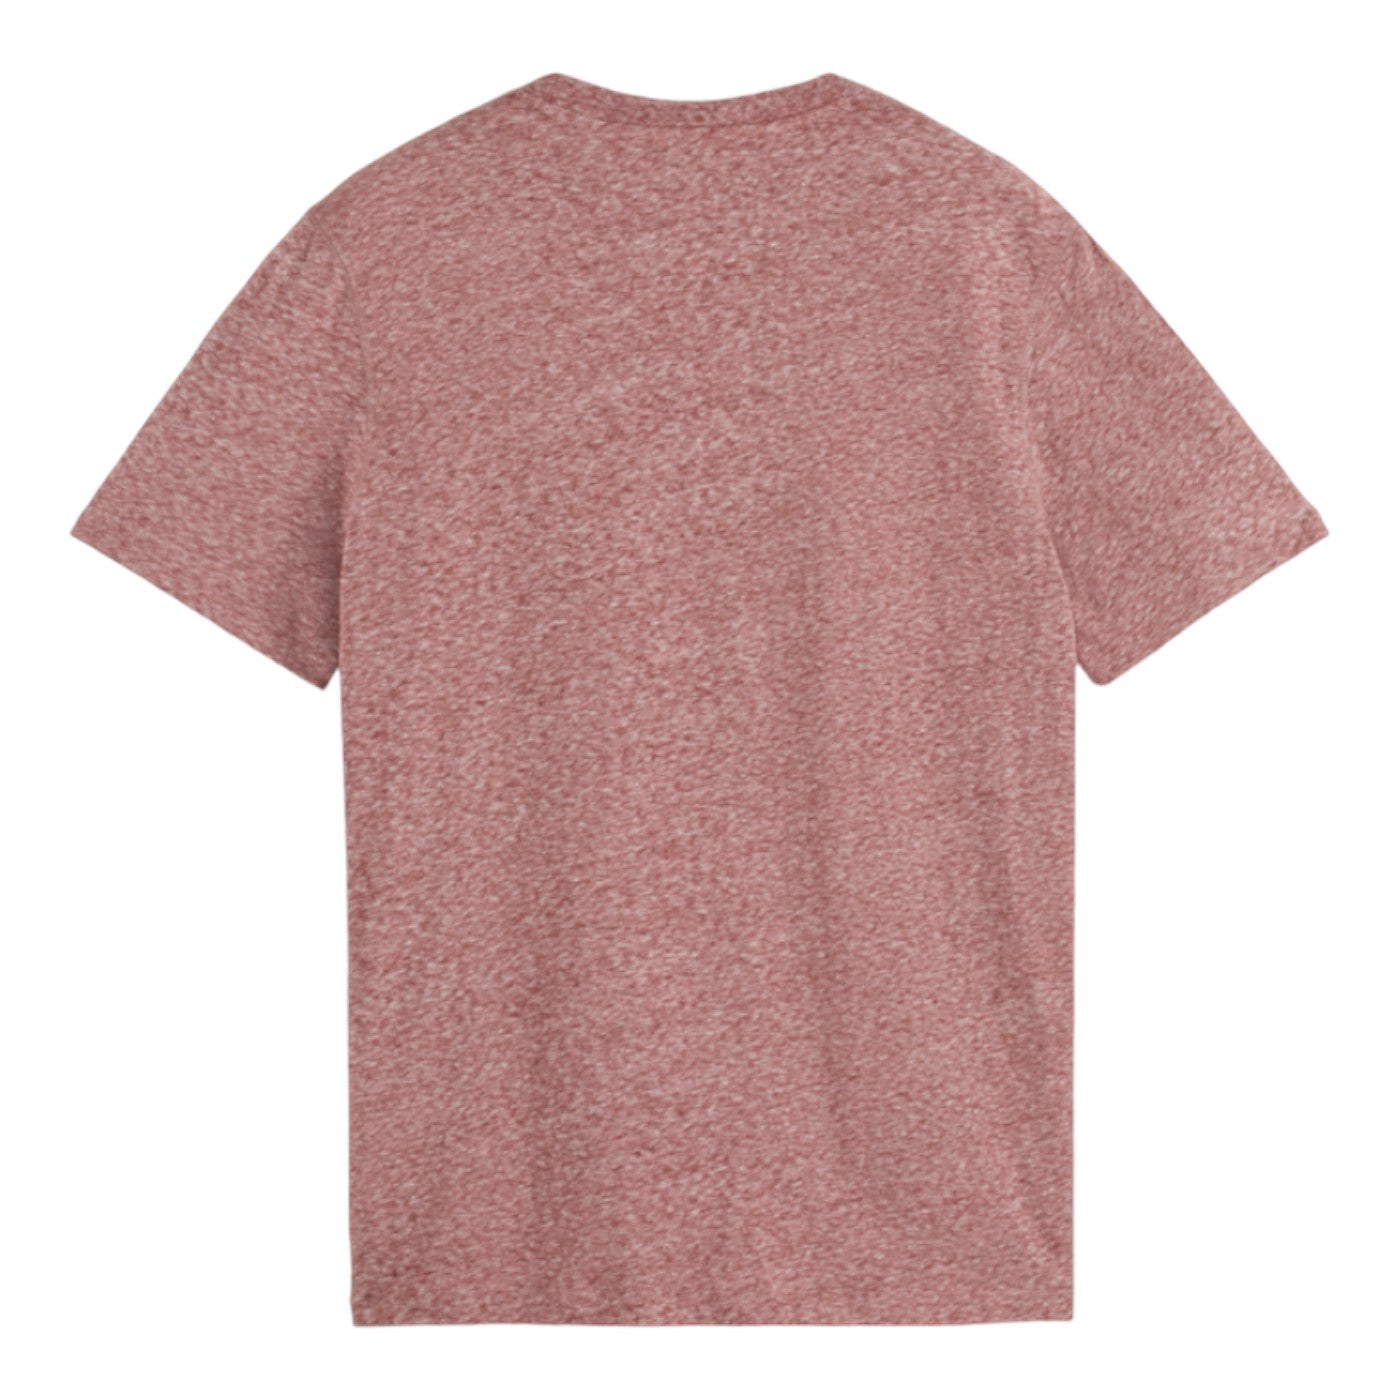 Pale red fitted tee shirt